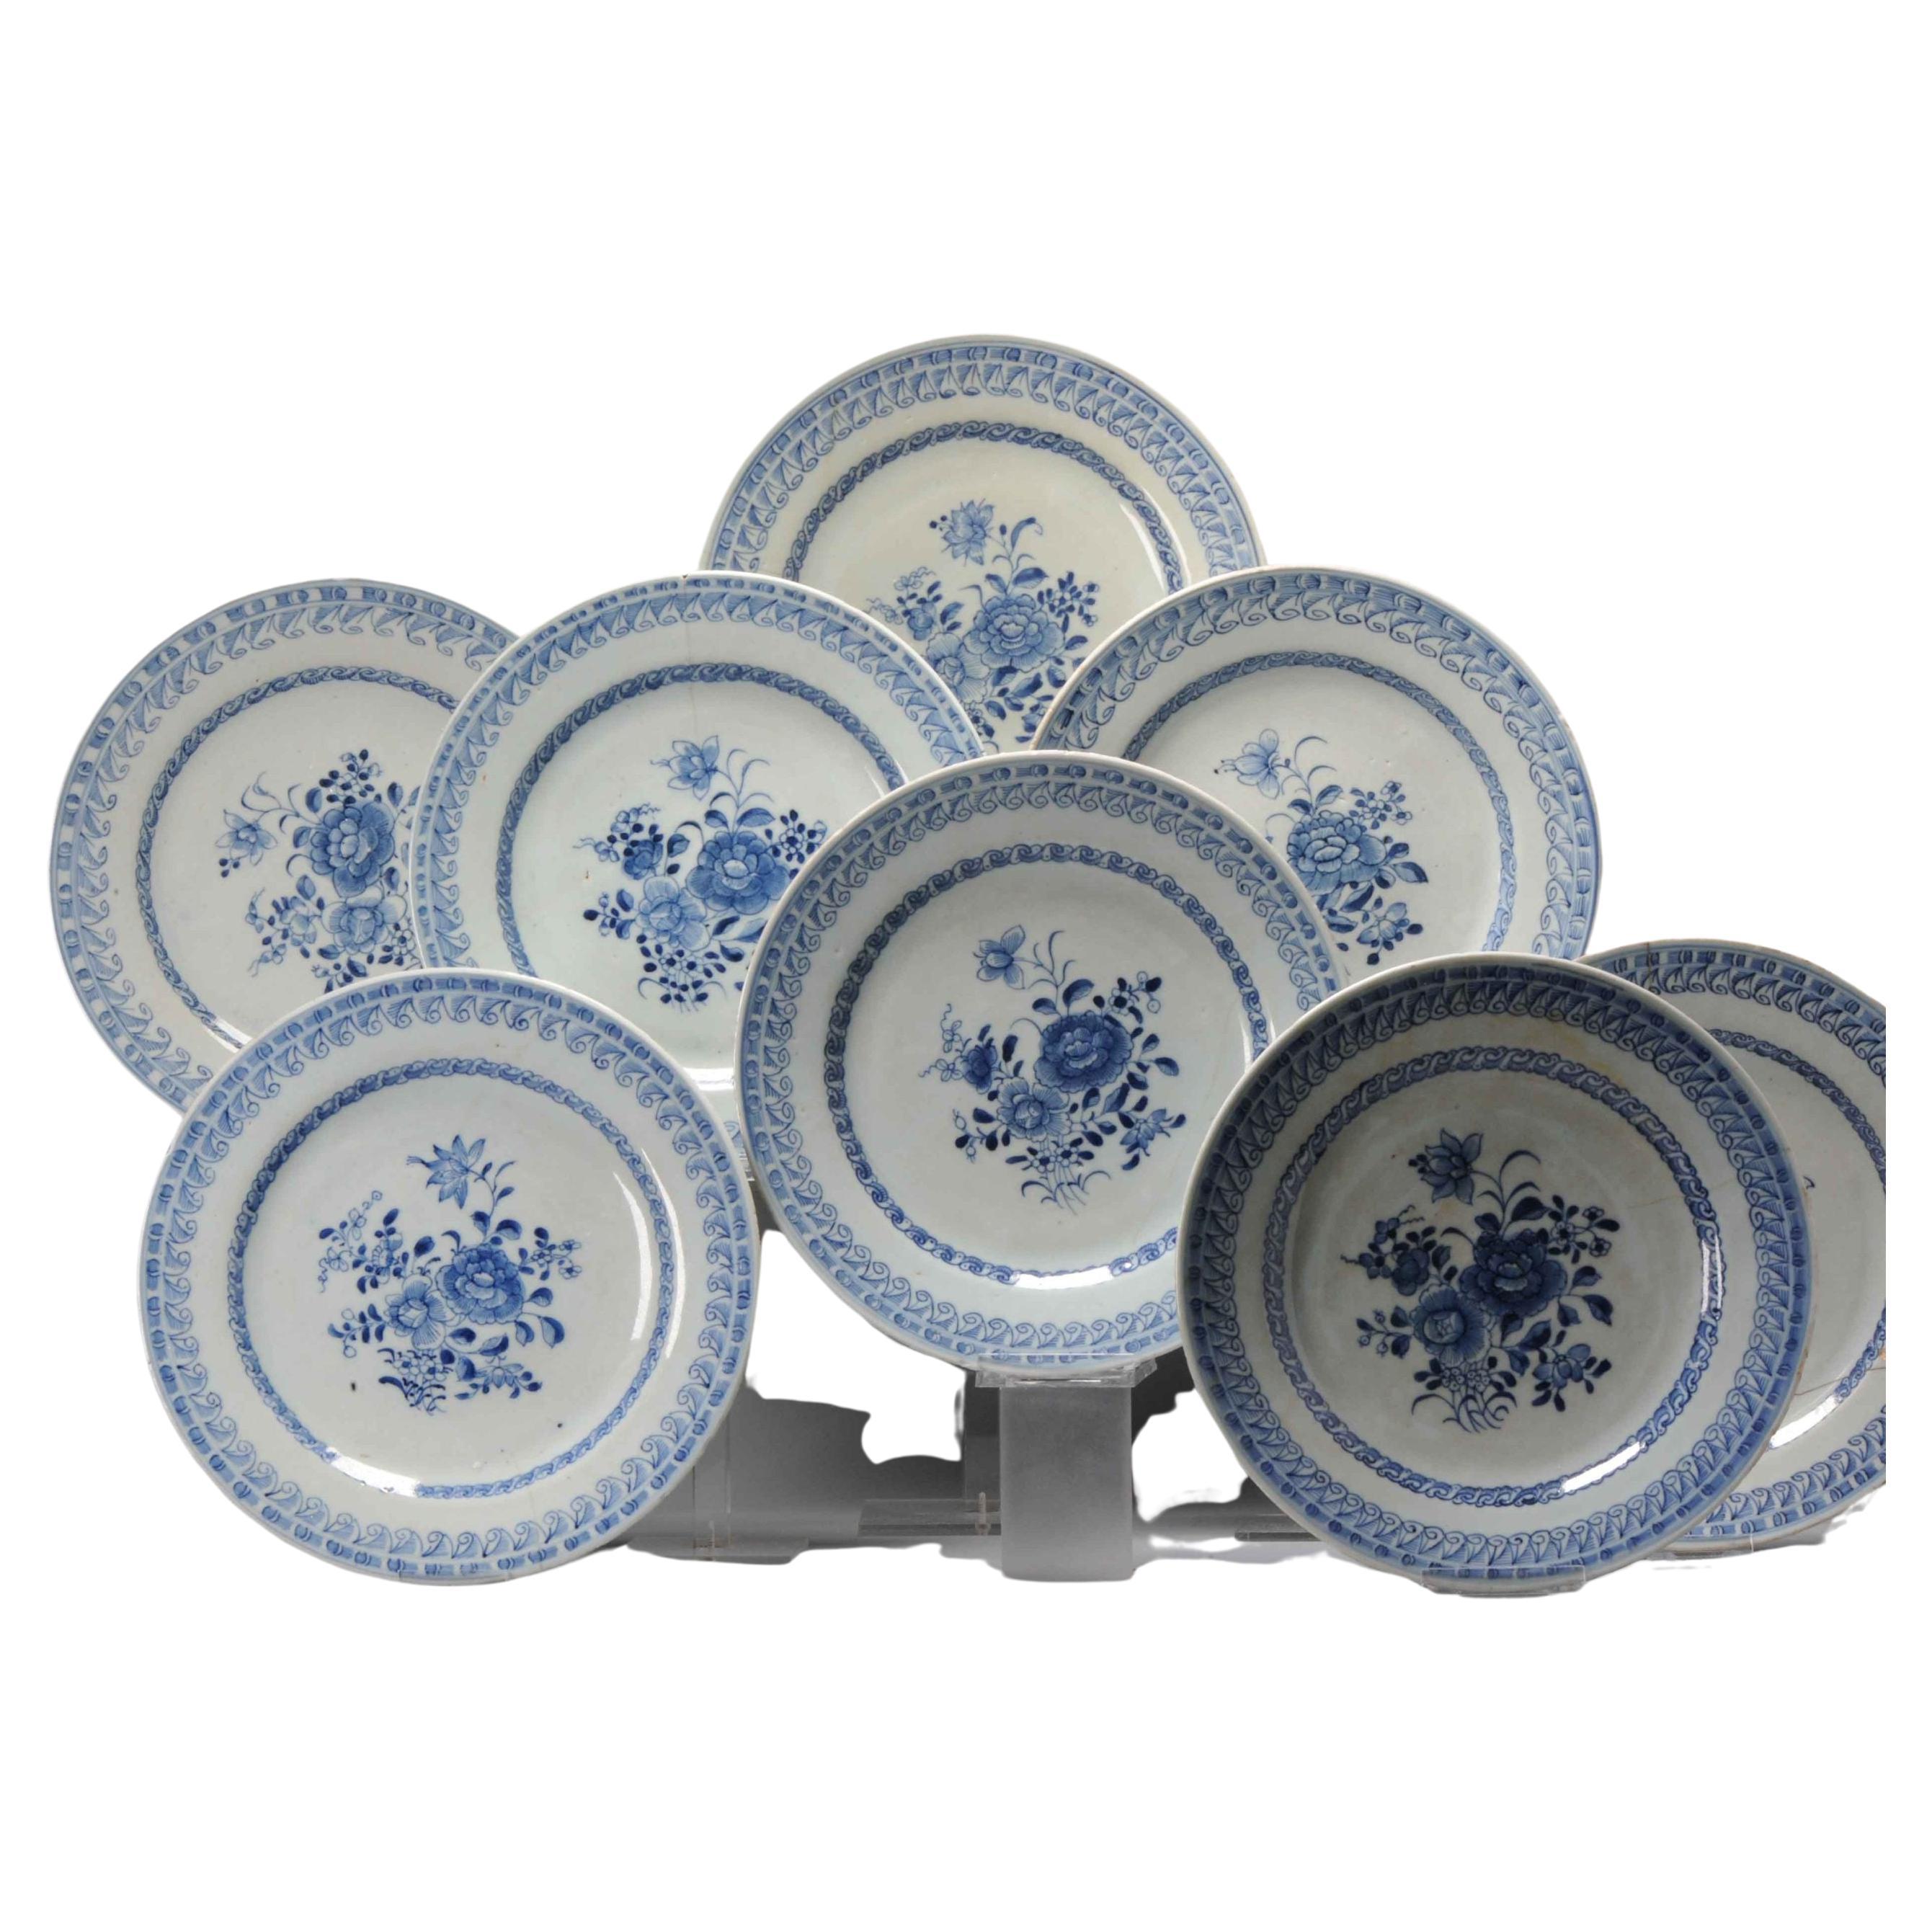 A very nicely decorated SET of 8 dishes in Blue and white with a lovely flower scene. Dating to circa 1720-1750

Unmarked at the base.


Condition
All with damage, 1 restored. Size 236x27mm DiameterxHeight
Period
18th century Qing (1661 -